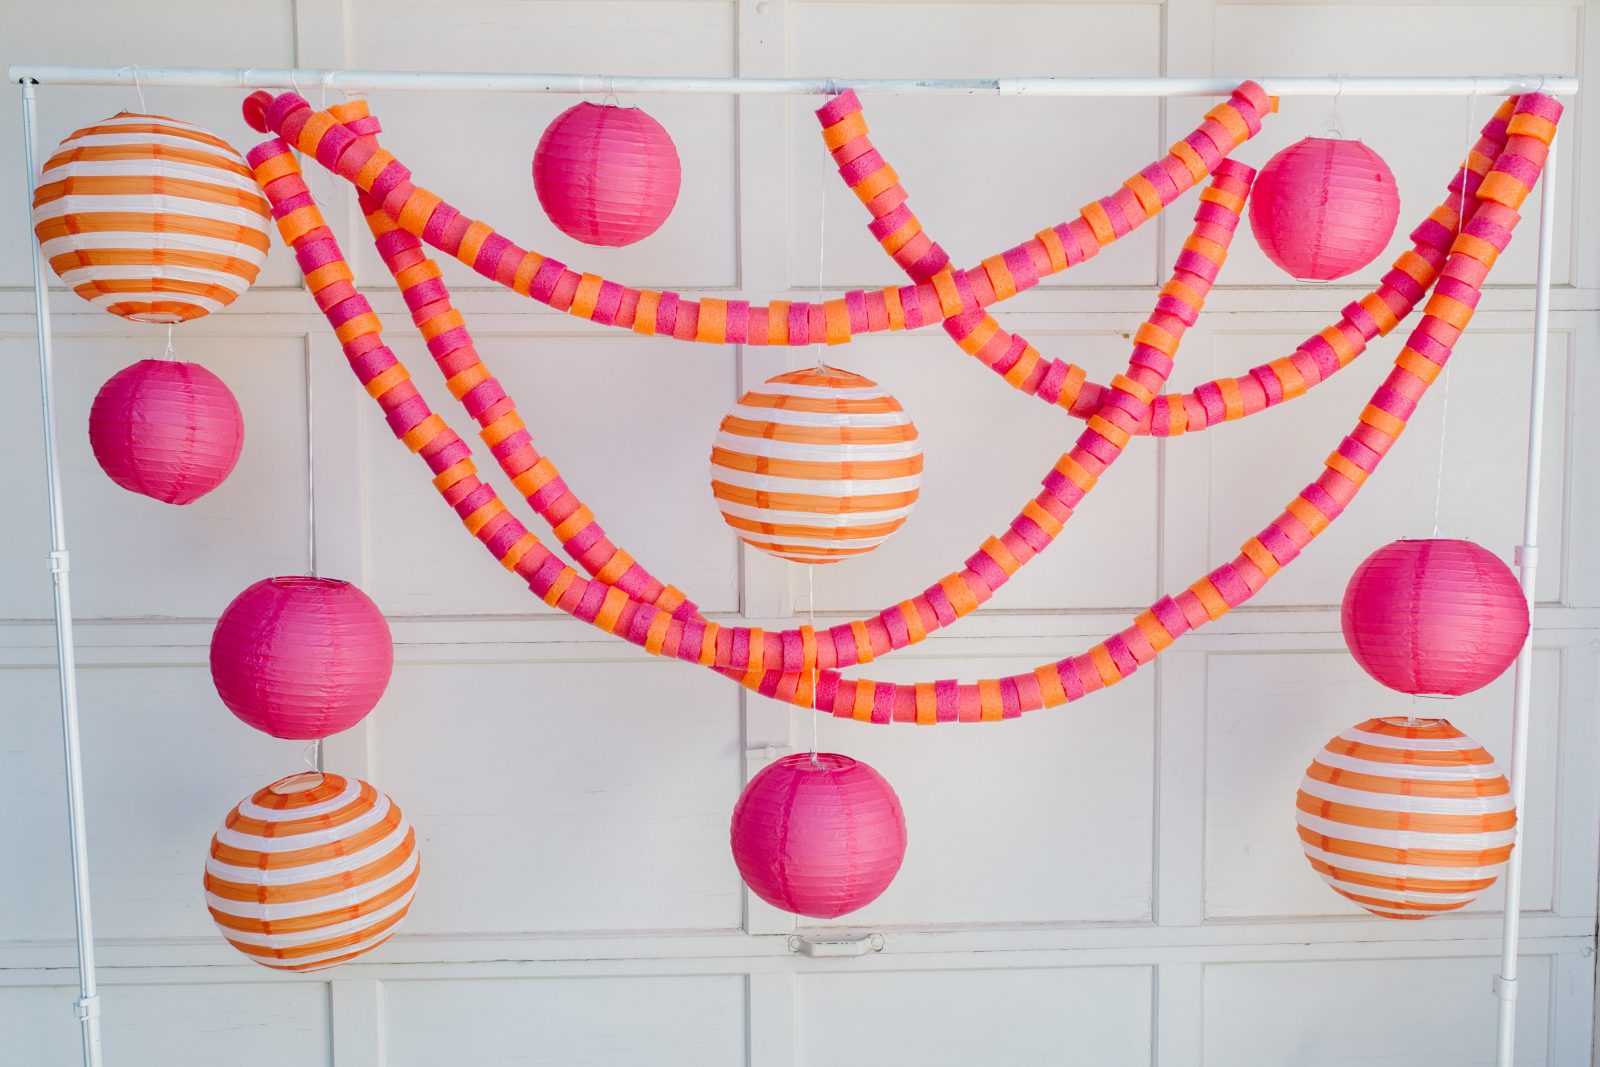 Summer Crafts: DIY Pool Noodle Garland + a tutorial featured by Top US Craft Blog + The Pretty Life Girls